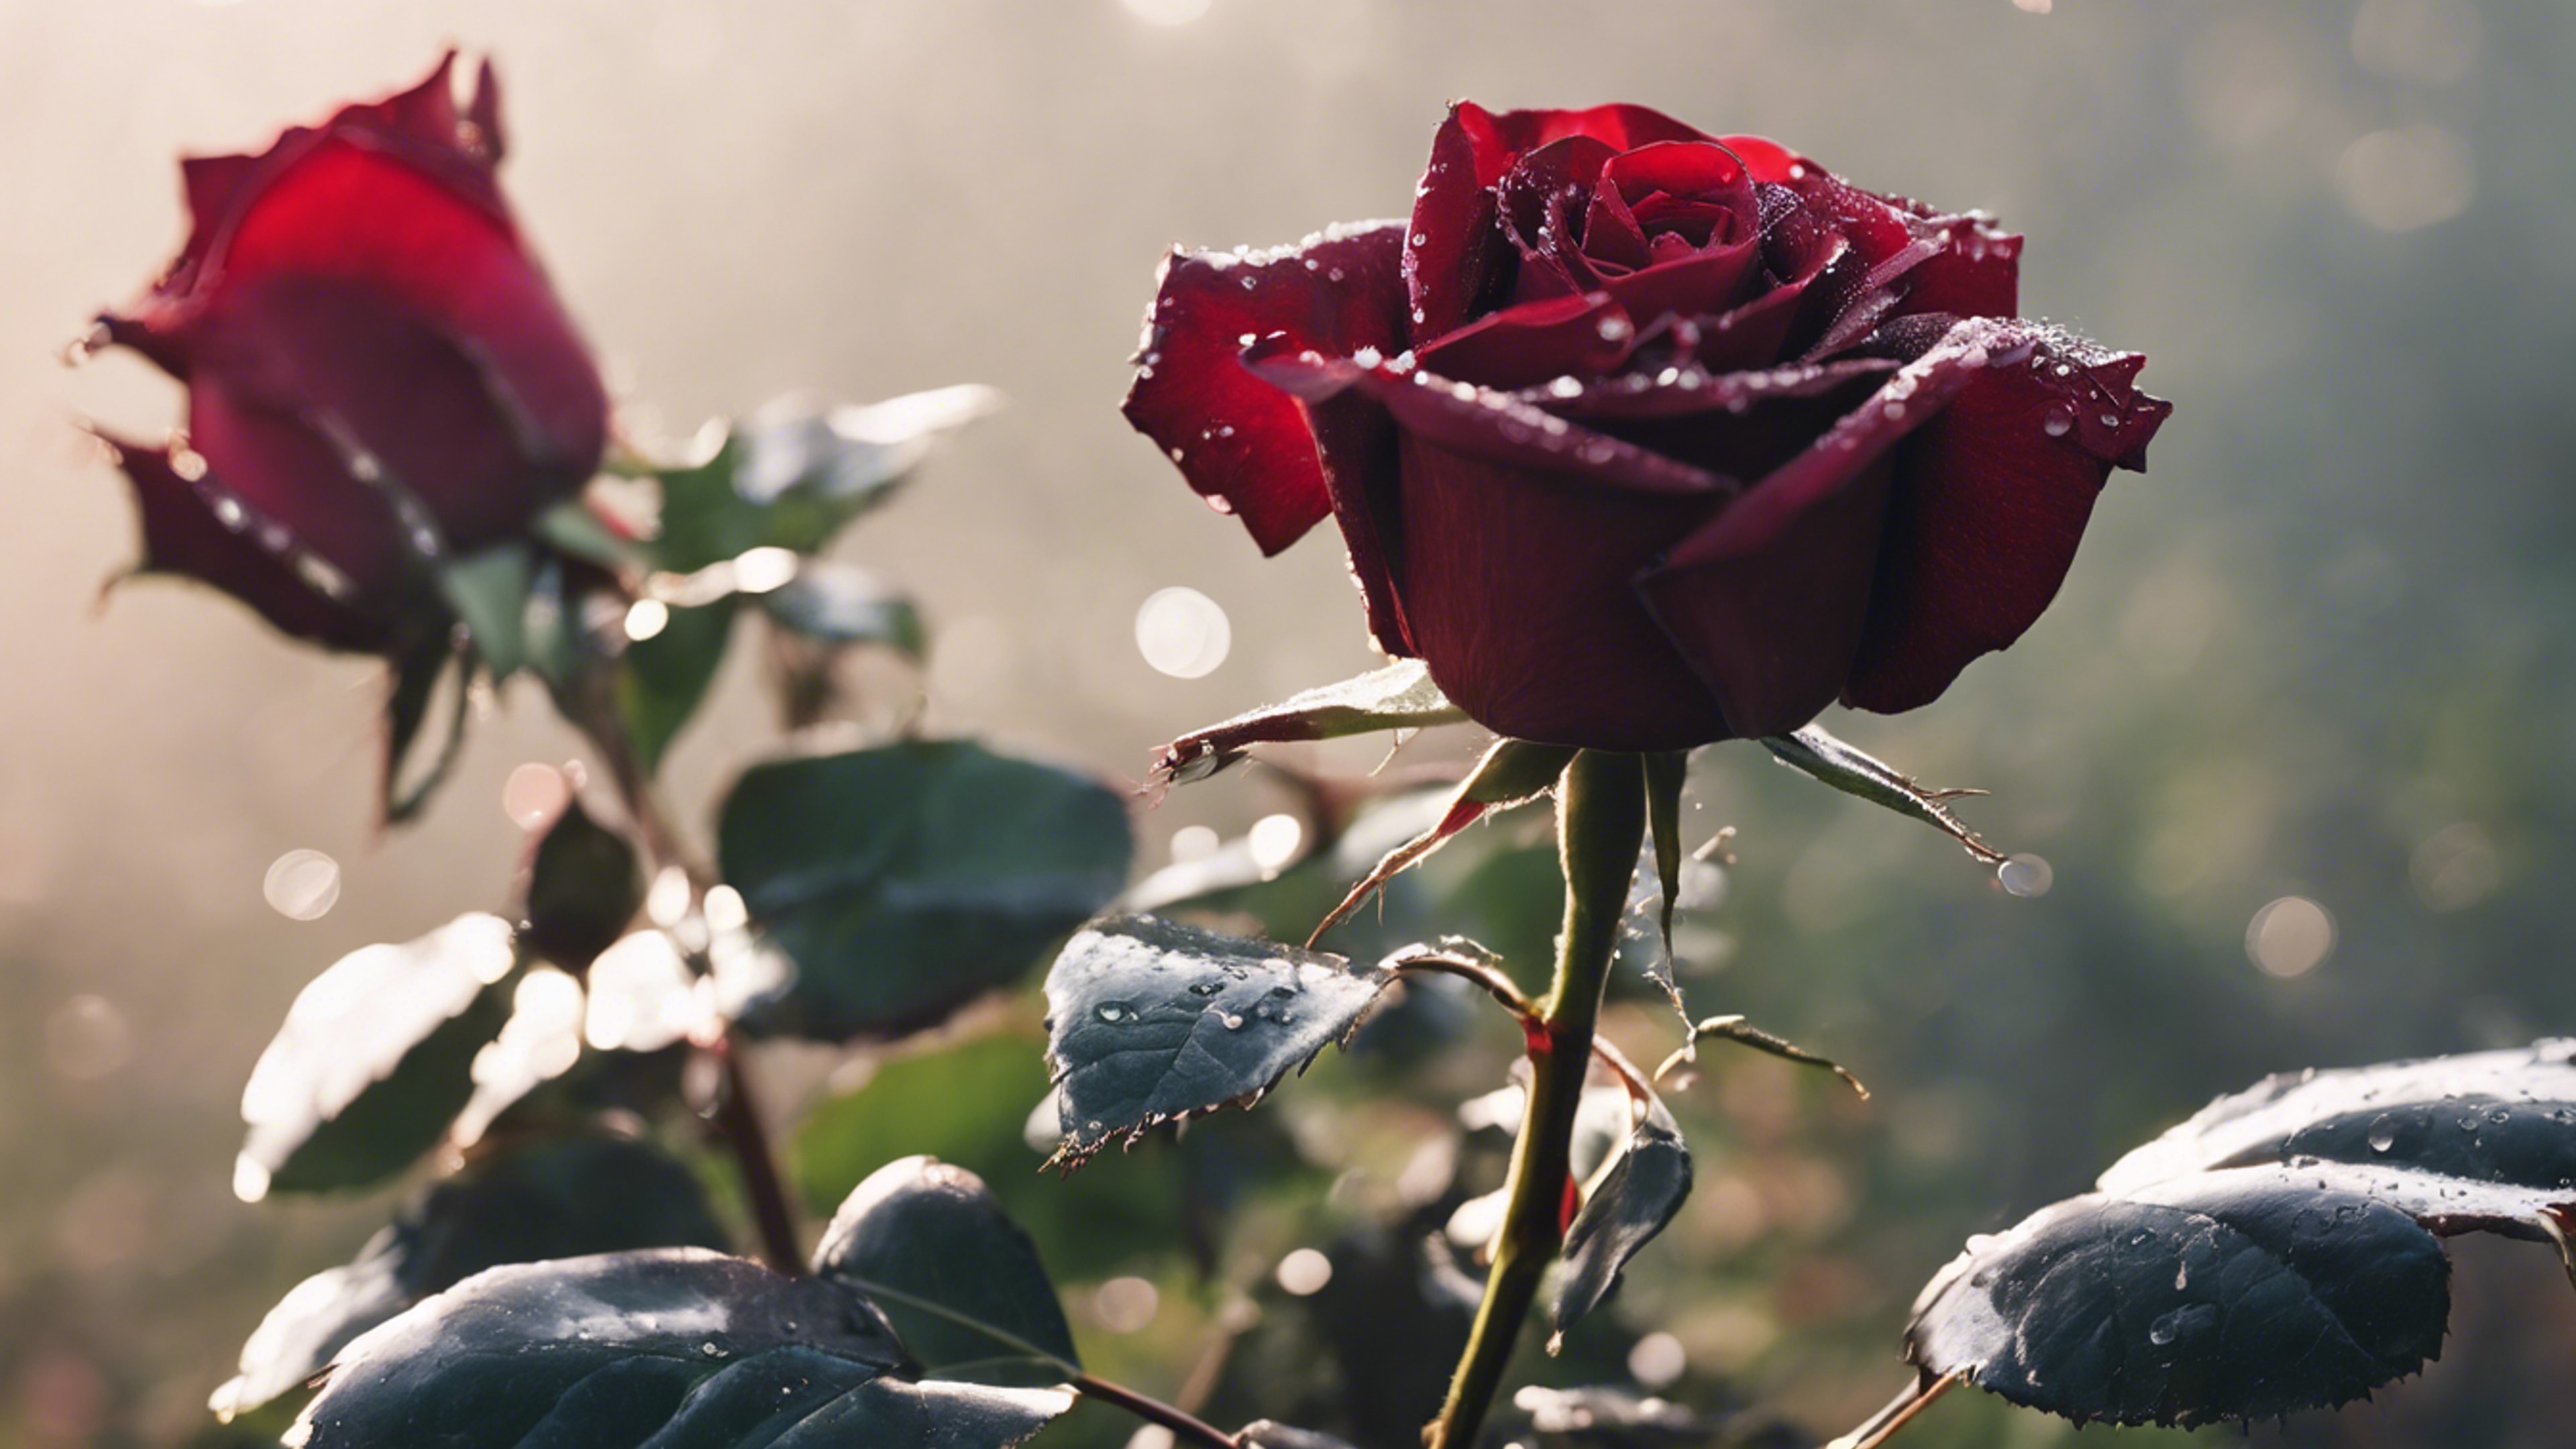 A lush dark red rose in full bloom, glistening with morning dew. Tapet[3308270db75d4dd78aa2]